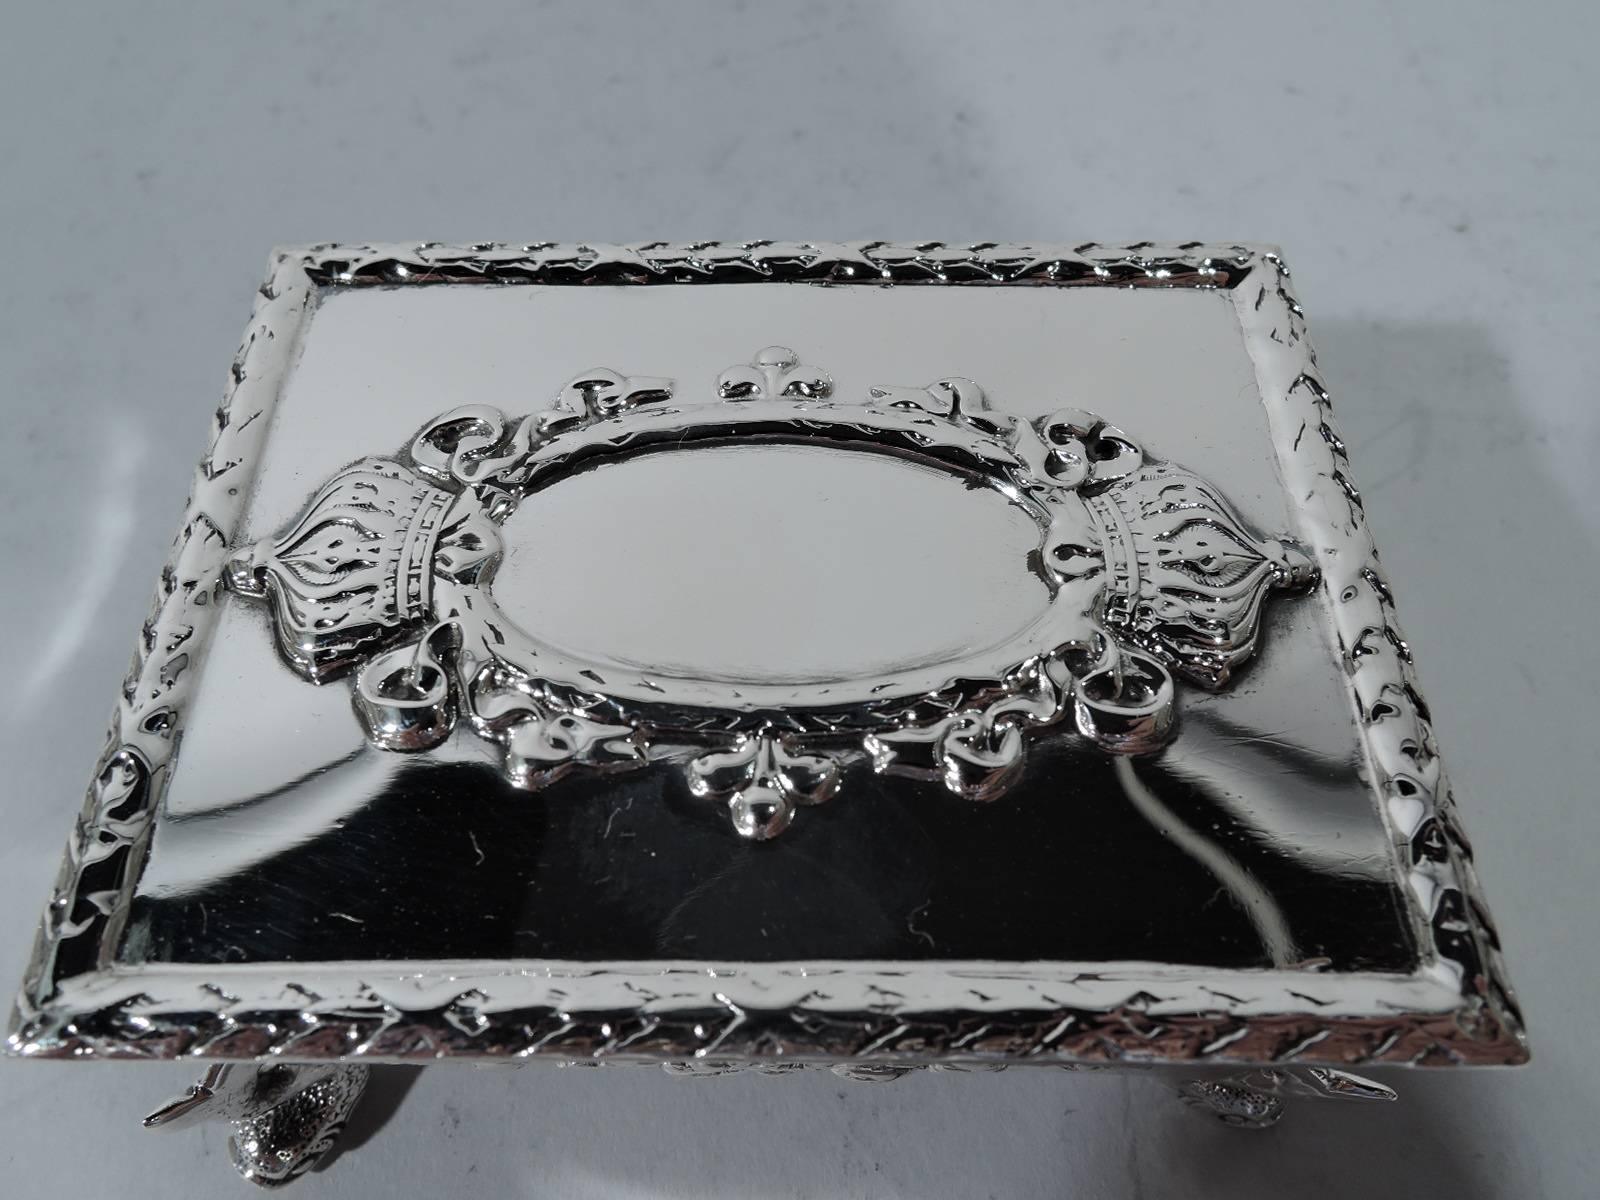 Antique American Sterling Silver Postage Stamp Box 1